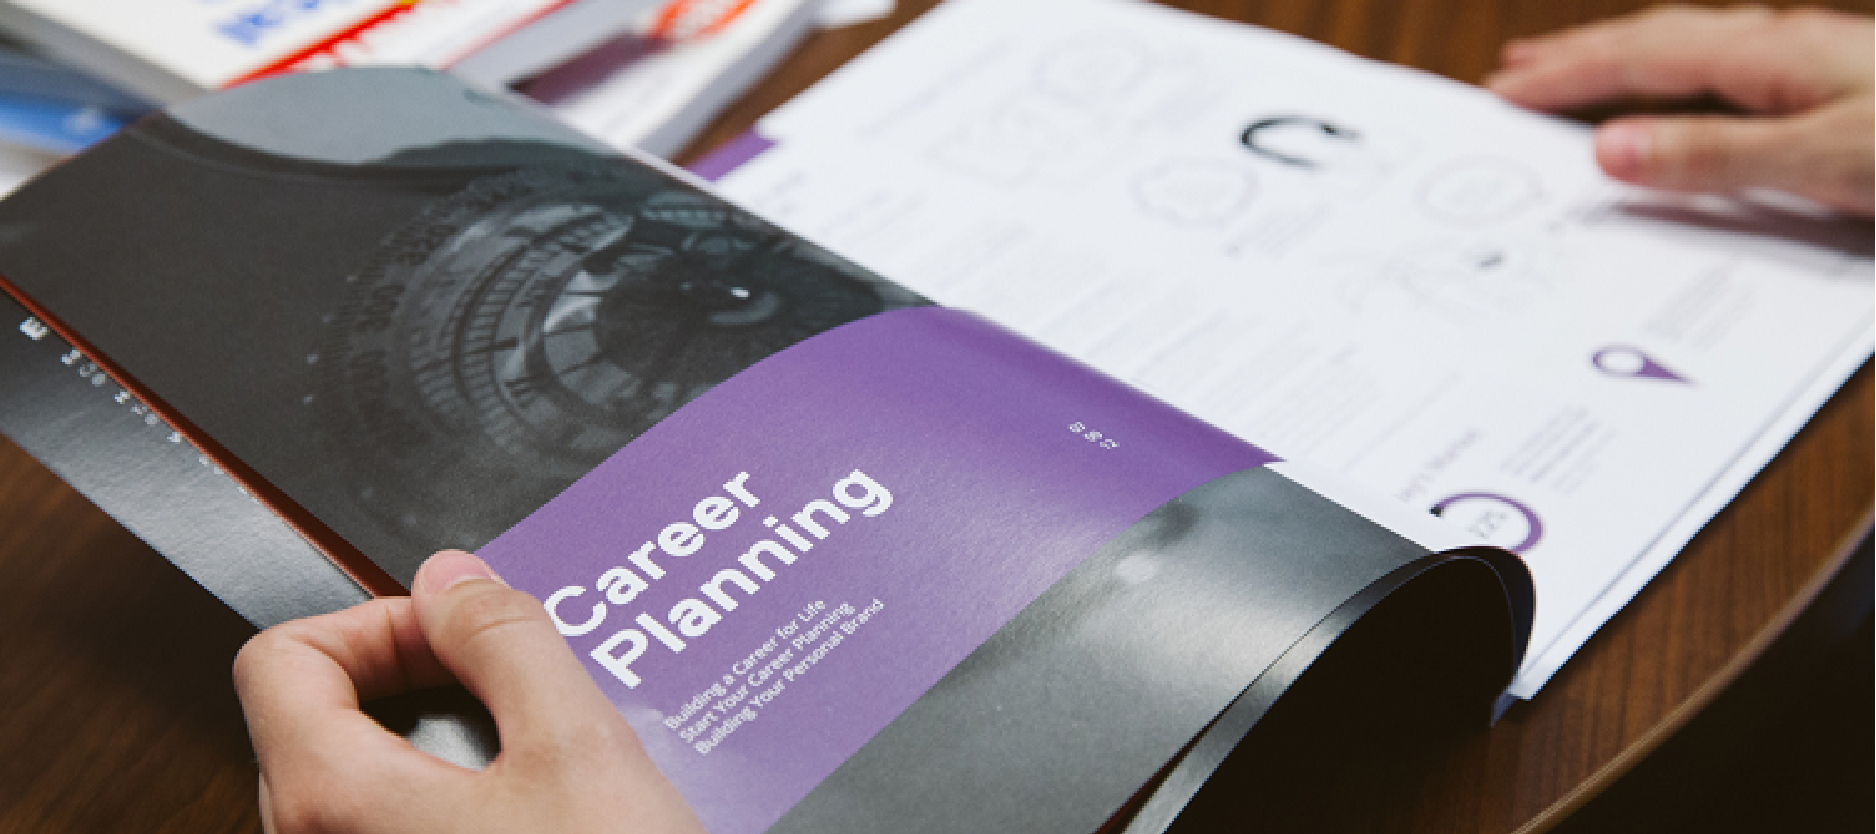 Career Compass publication open to the page about career planning.